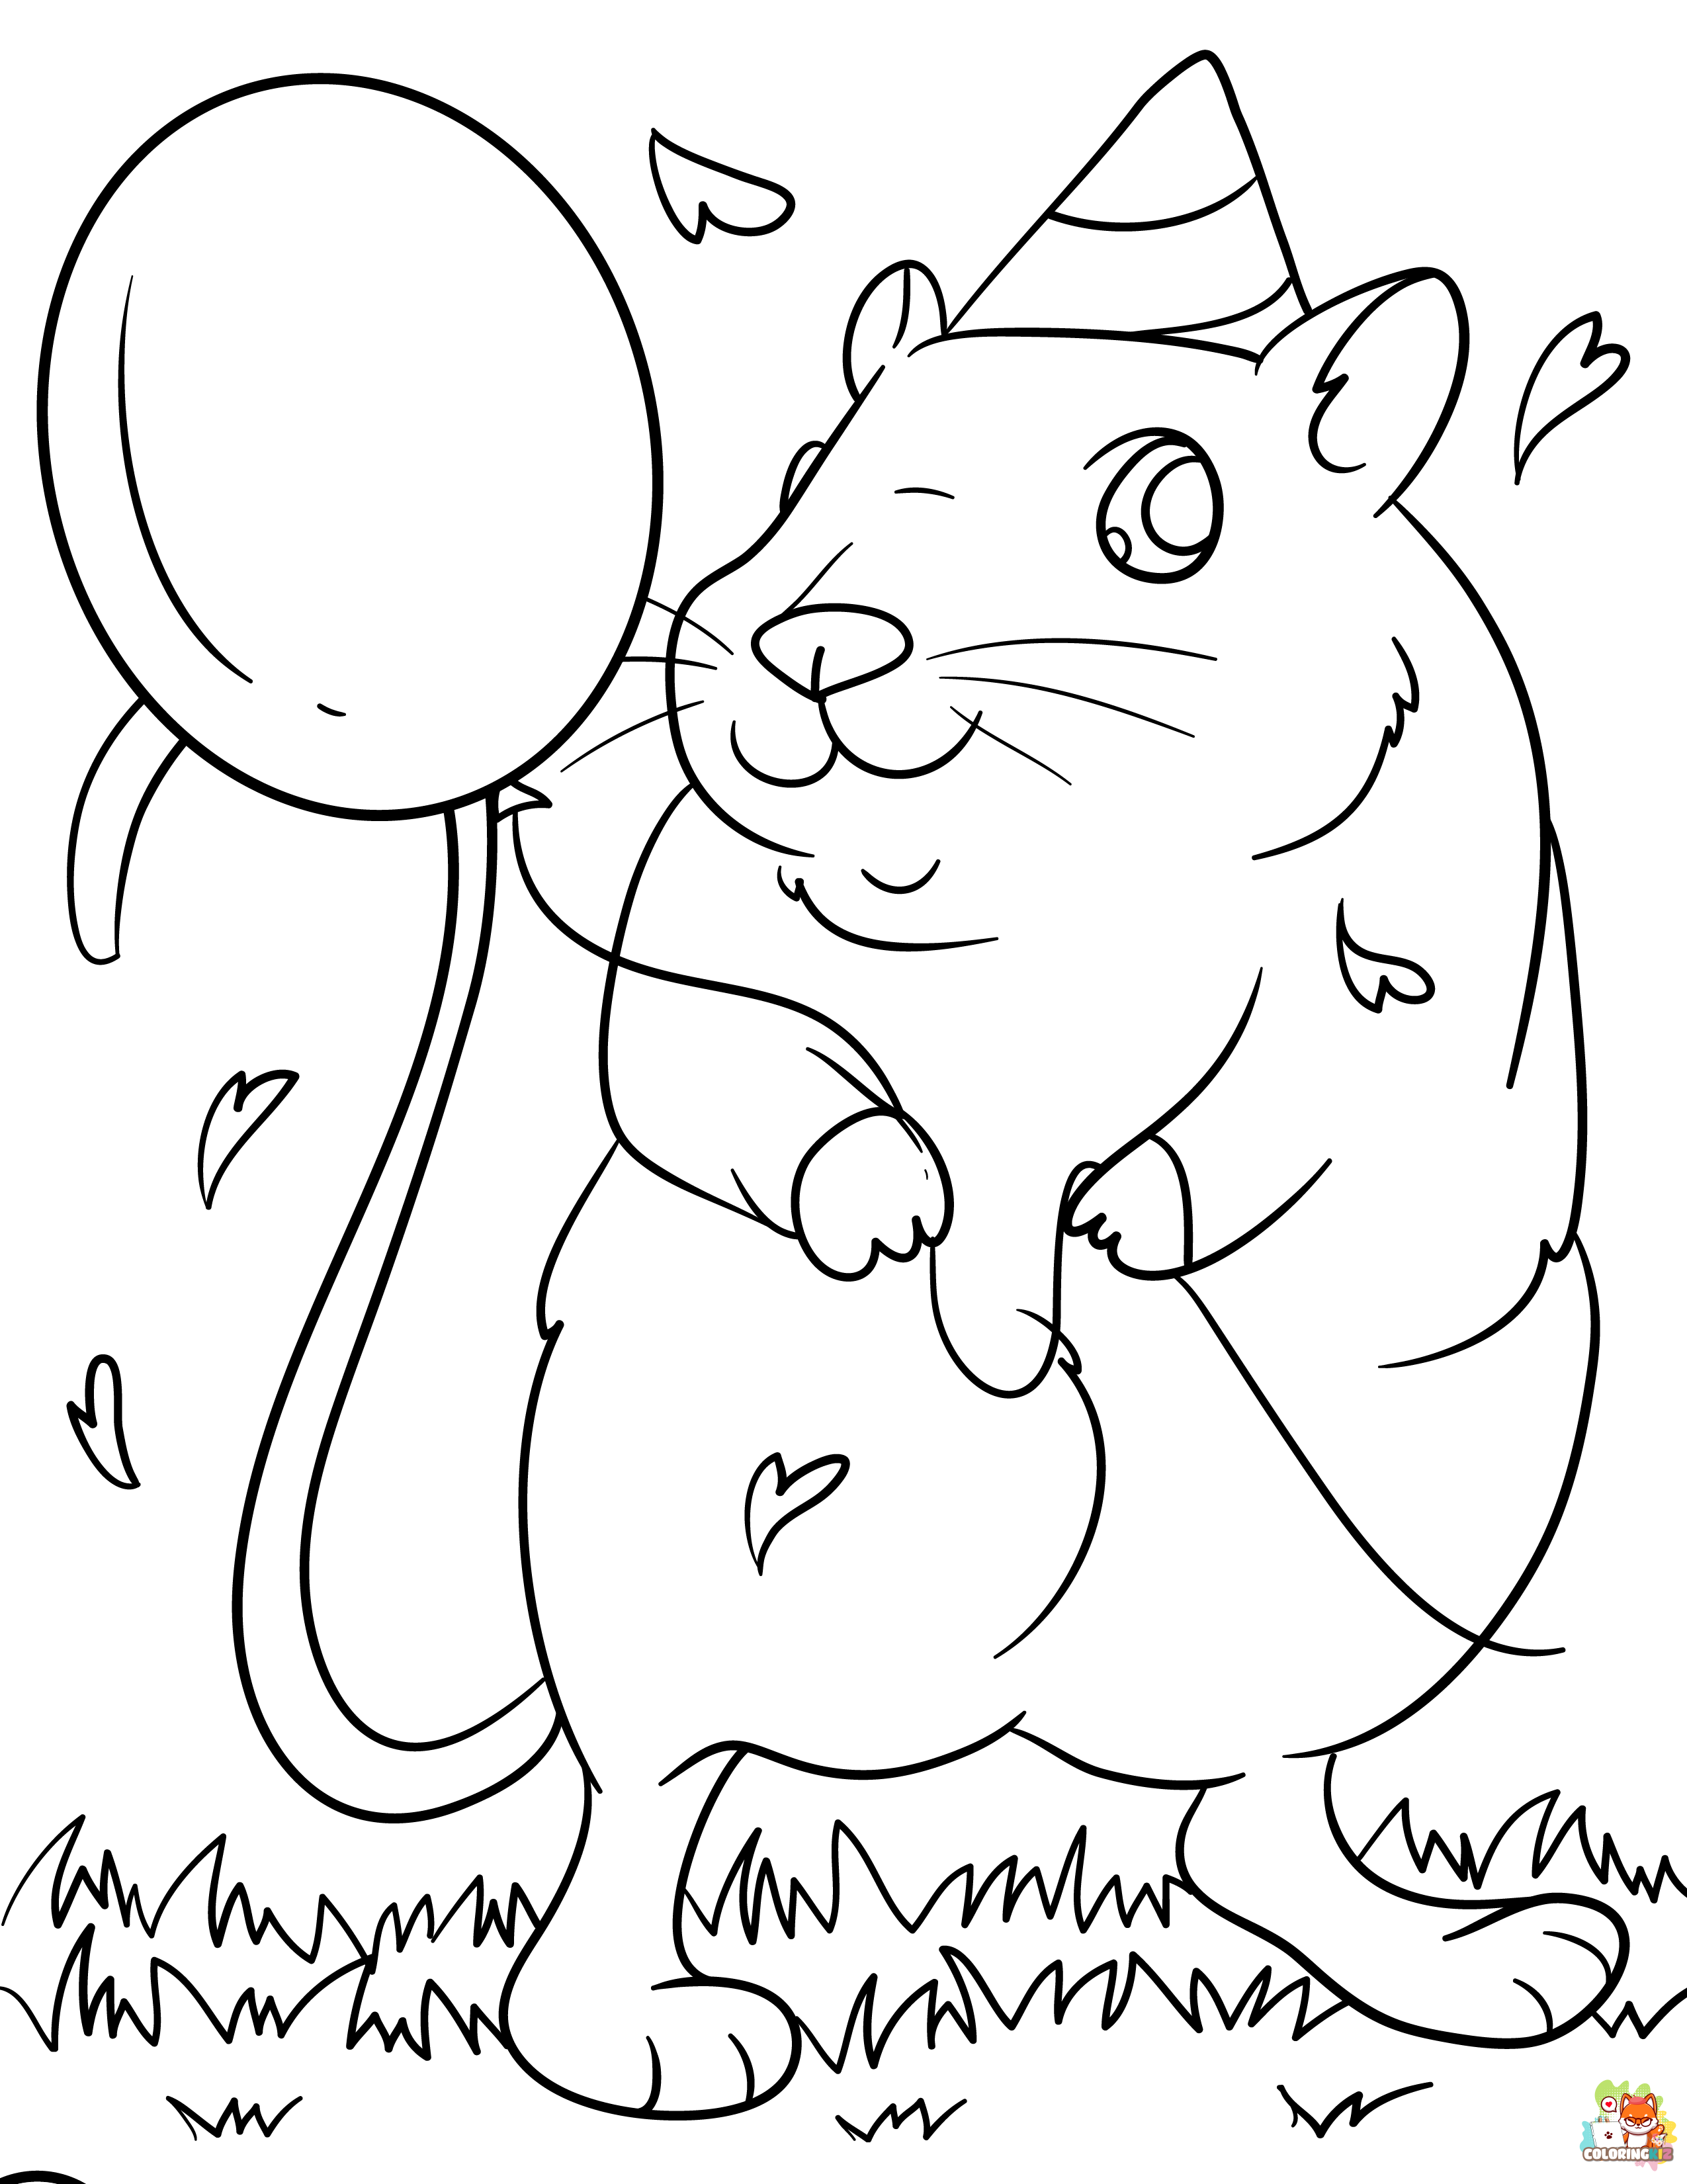 Hamster Coloring Pages 3